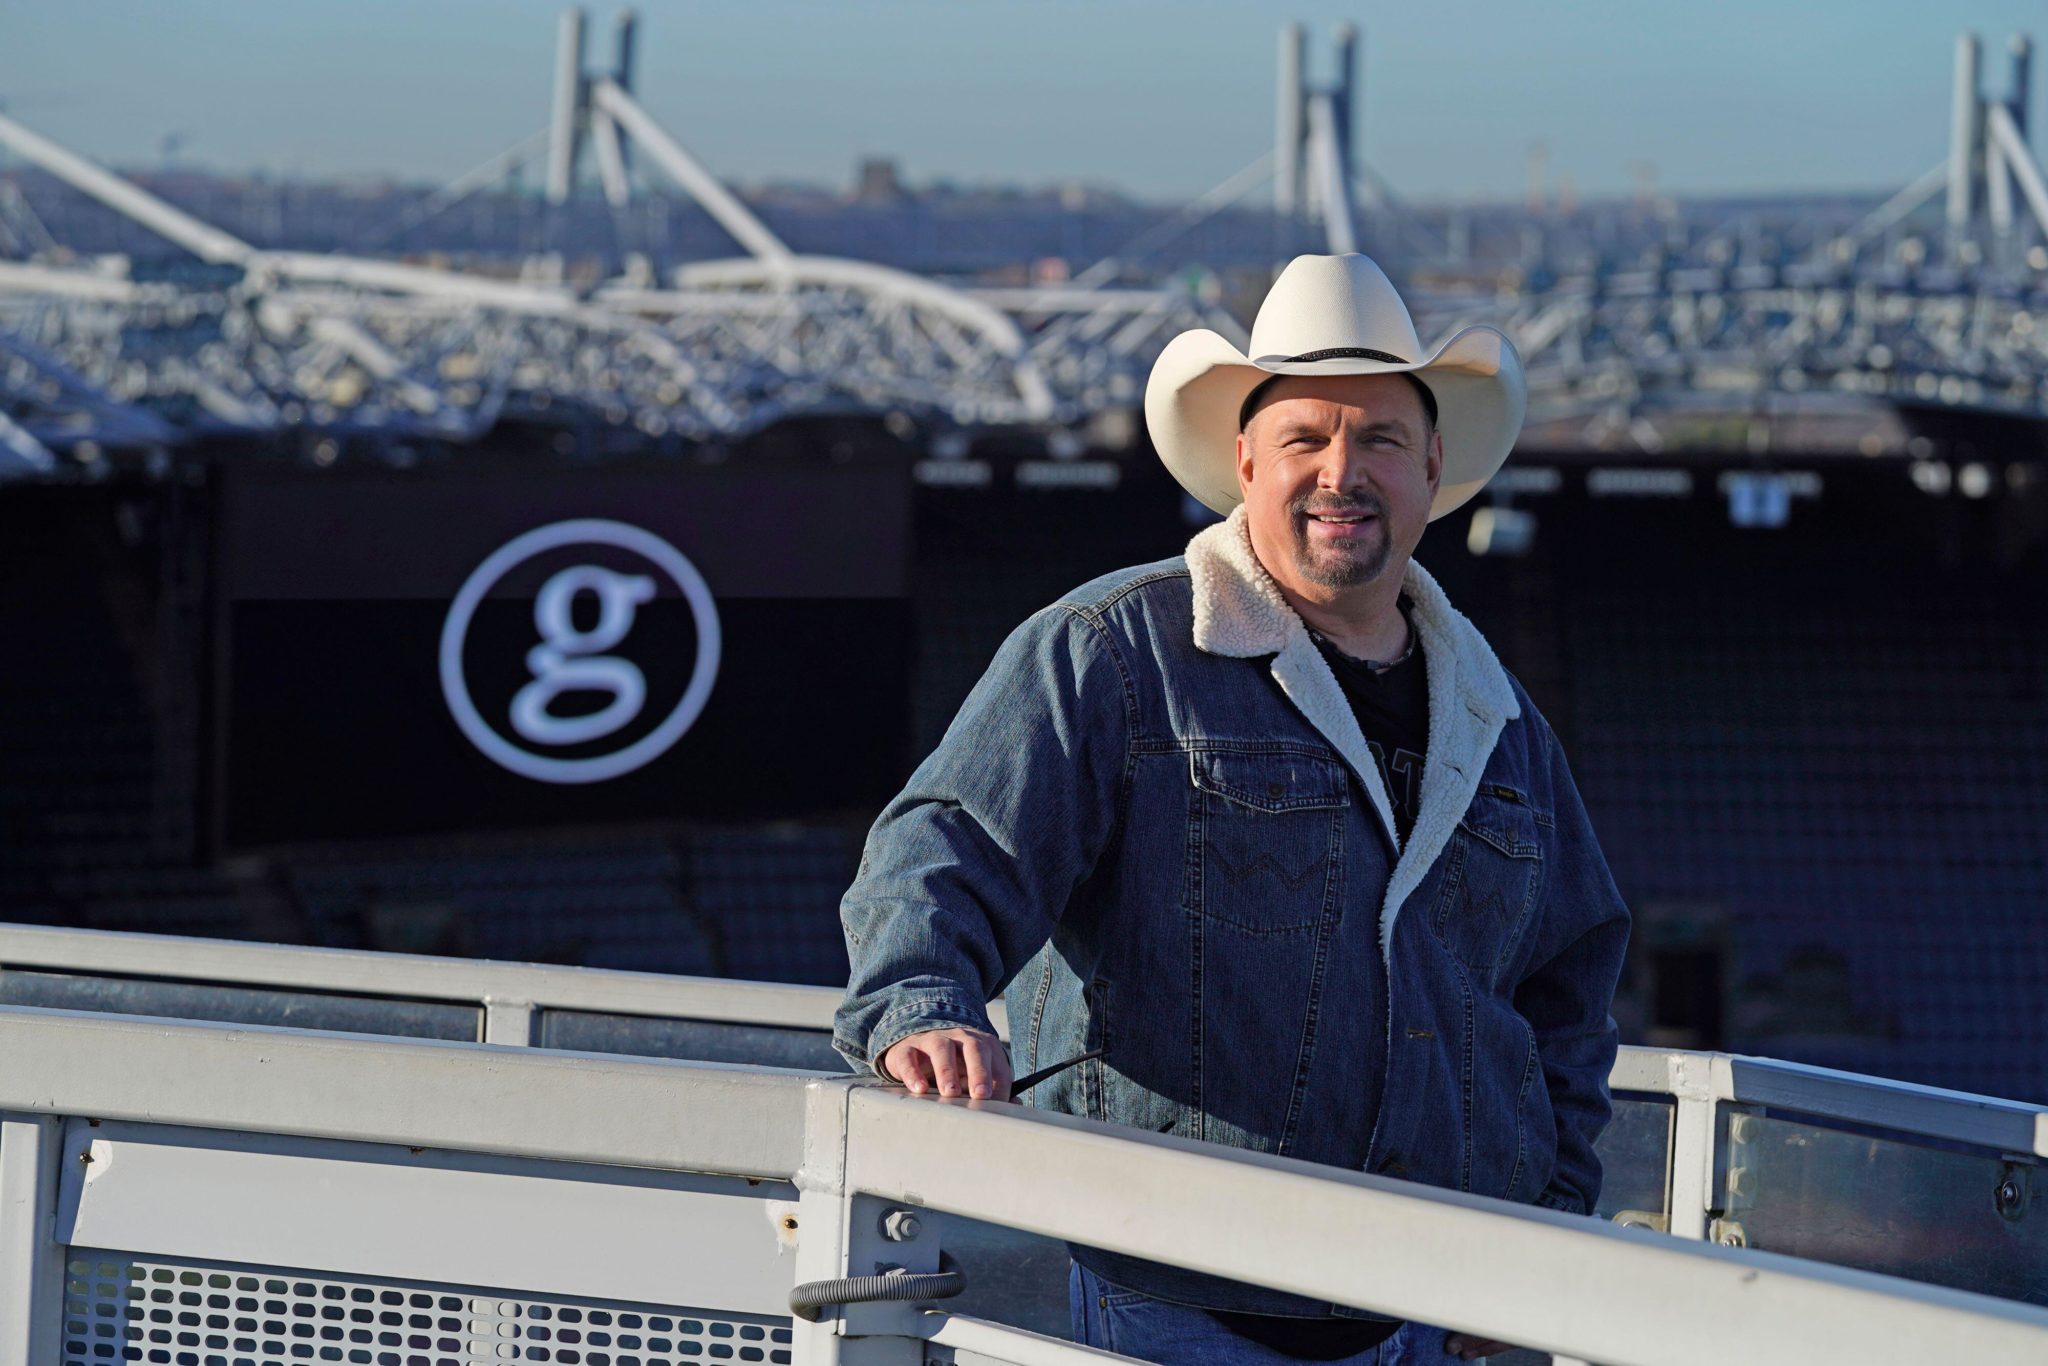 2H7D650 Country music star Garth Brooks at Croke Park in Dublin, 22-11-2021. Image: PA Images / Alamy Stock Photo